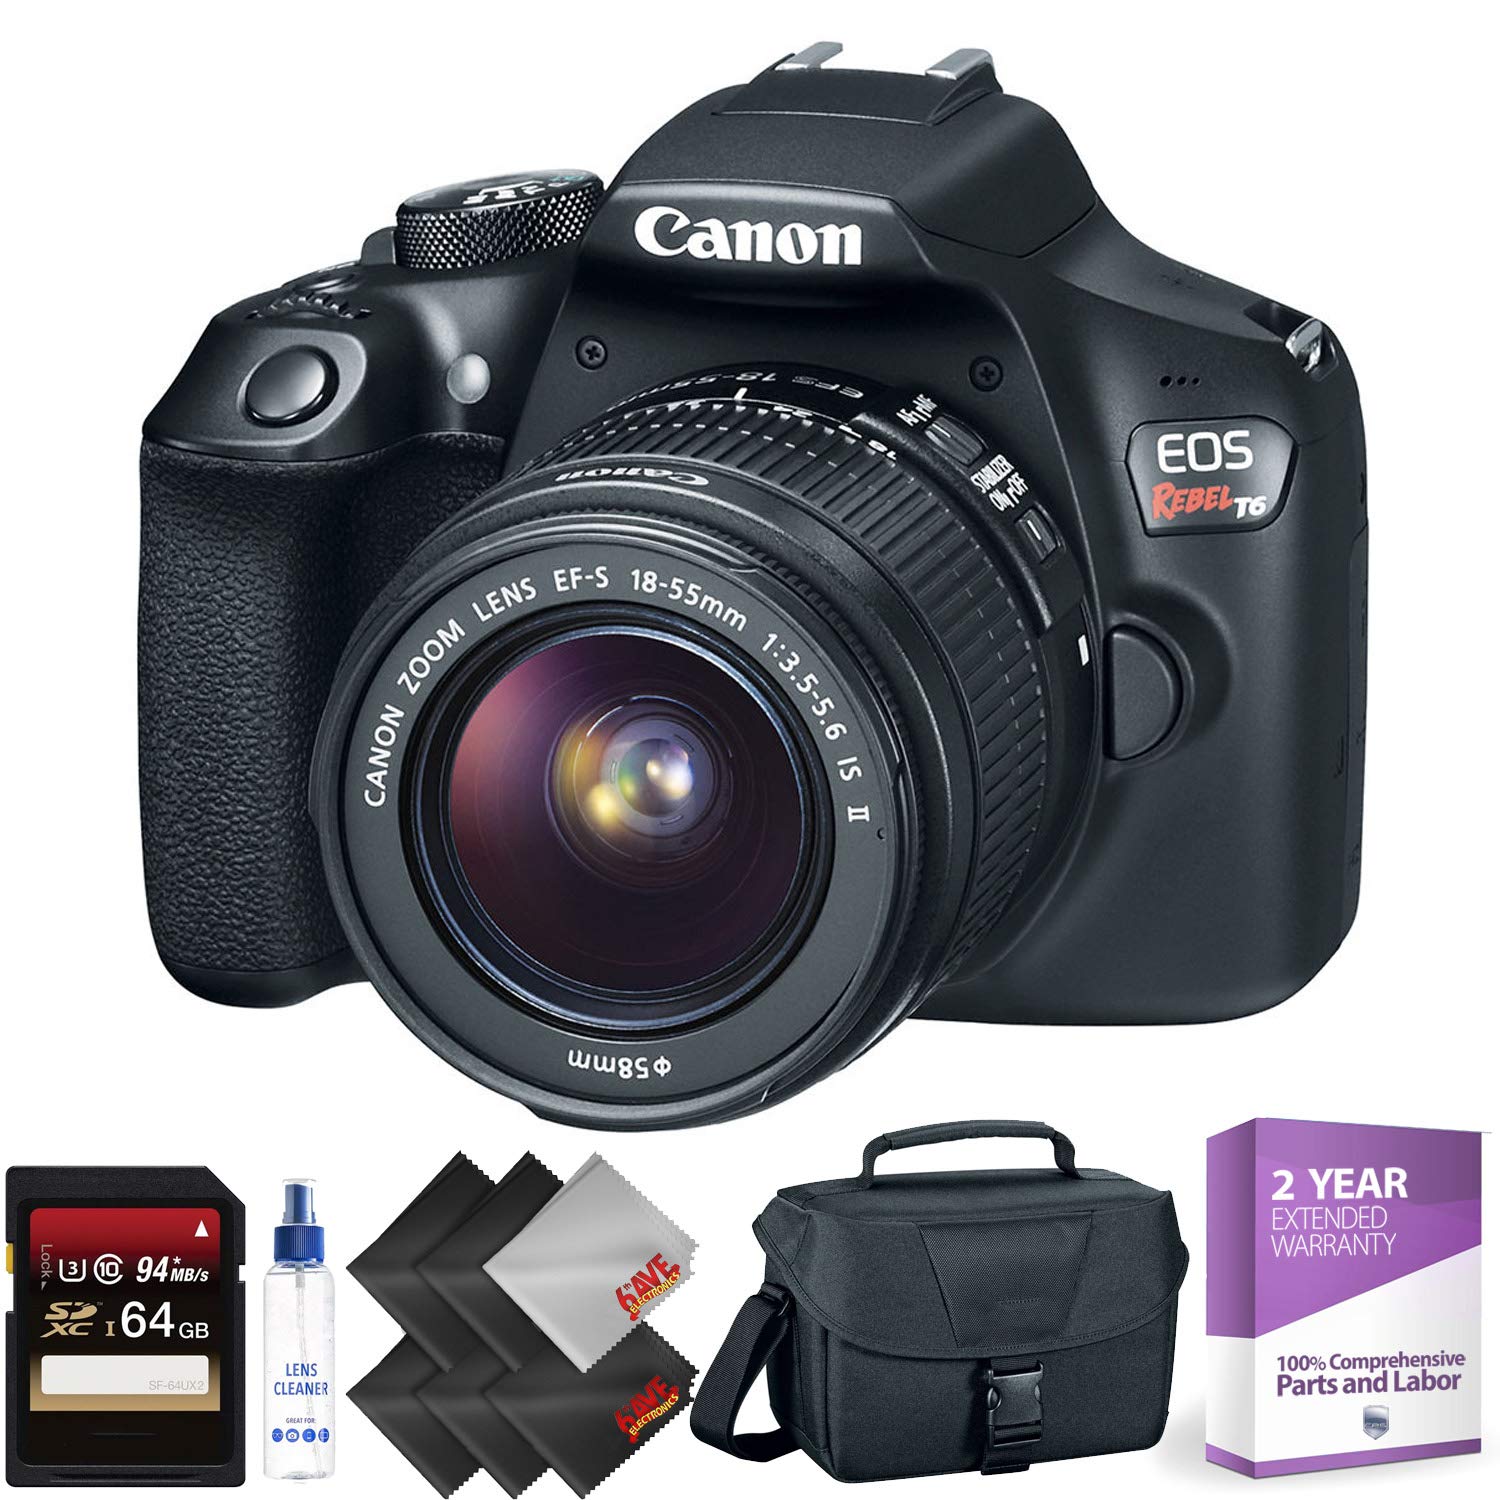 Canon EOS Rebel T6 DSLR Camera with 18-55mm Lens + 64GB Memory Card + 2 Year Accidental Warranty Bundle